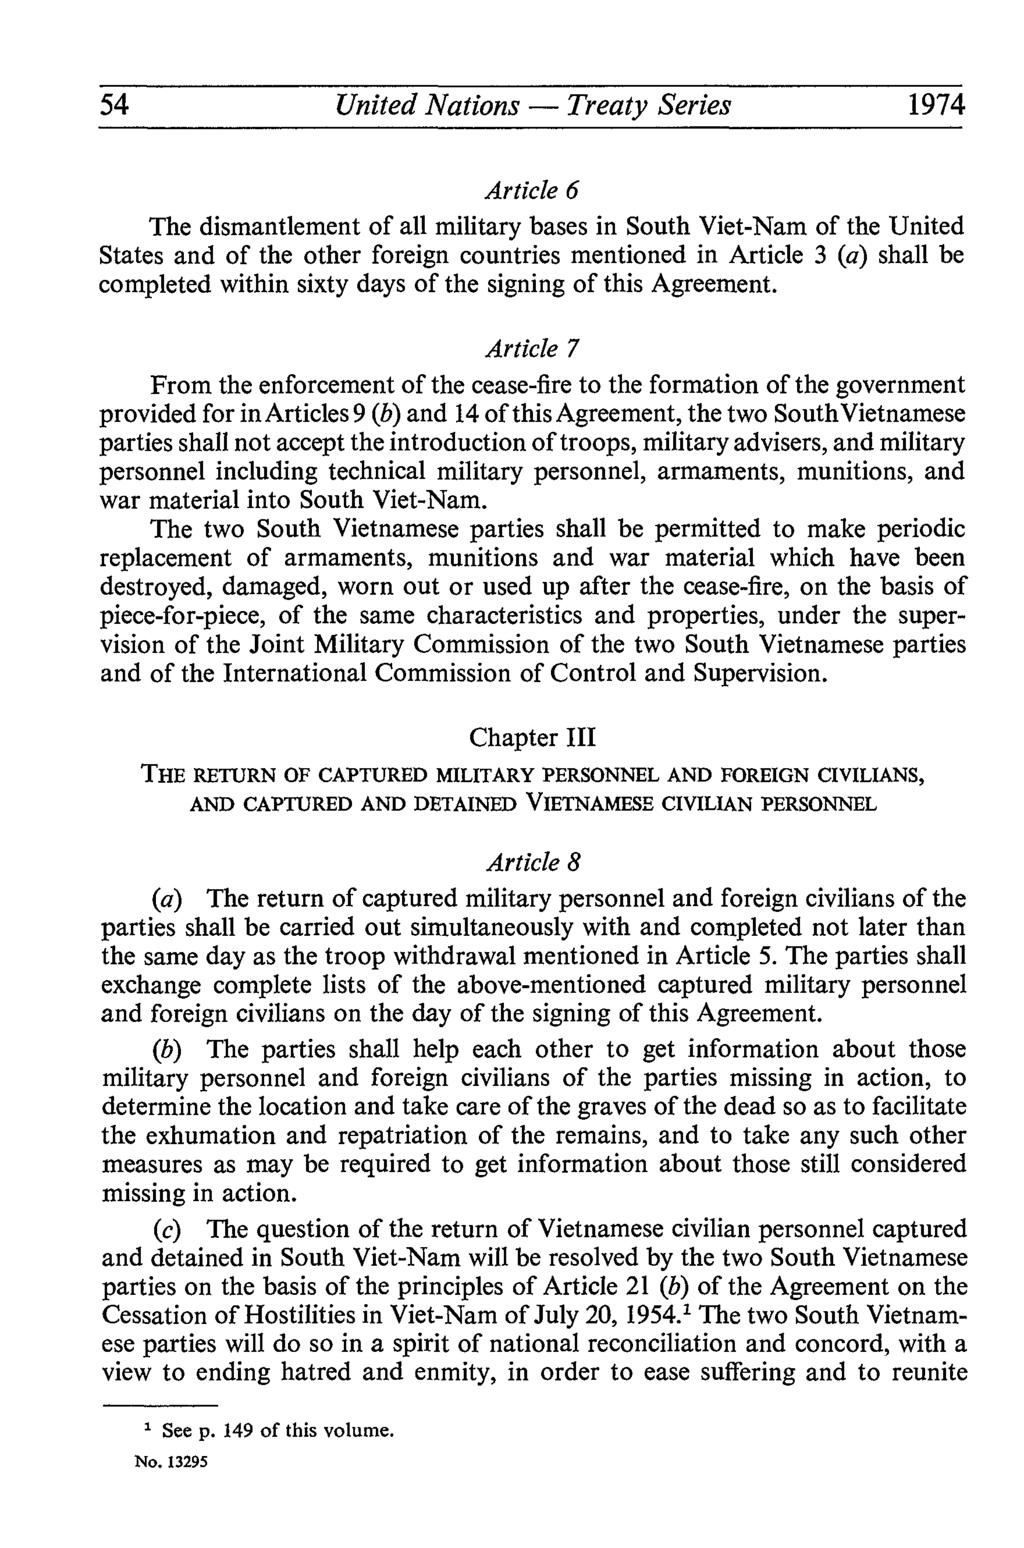 54 United Nations Treaty Series 1974 Article 6 The dismantlement of all military bases in South Viet-Nam of the United States and of the other foreign countries mentioned in Article 3 (a) shall be